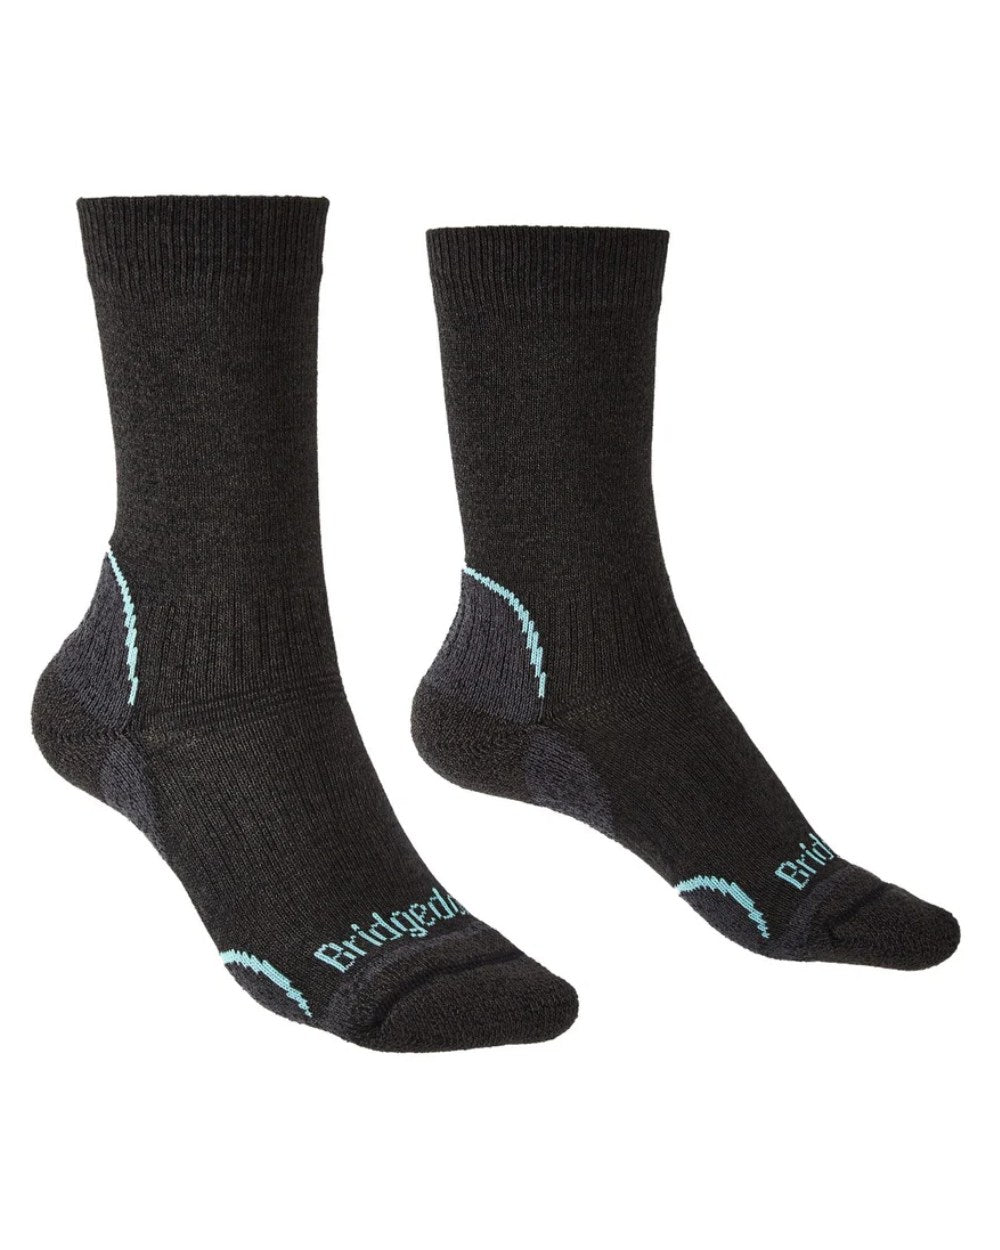 Graphite/Mint Coloured Bridgedale Womens Lightweight T2 Coolmax Performance Boot Socks On A White Background 